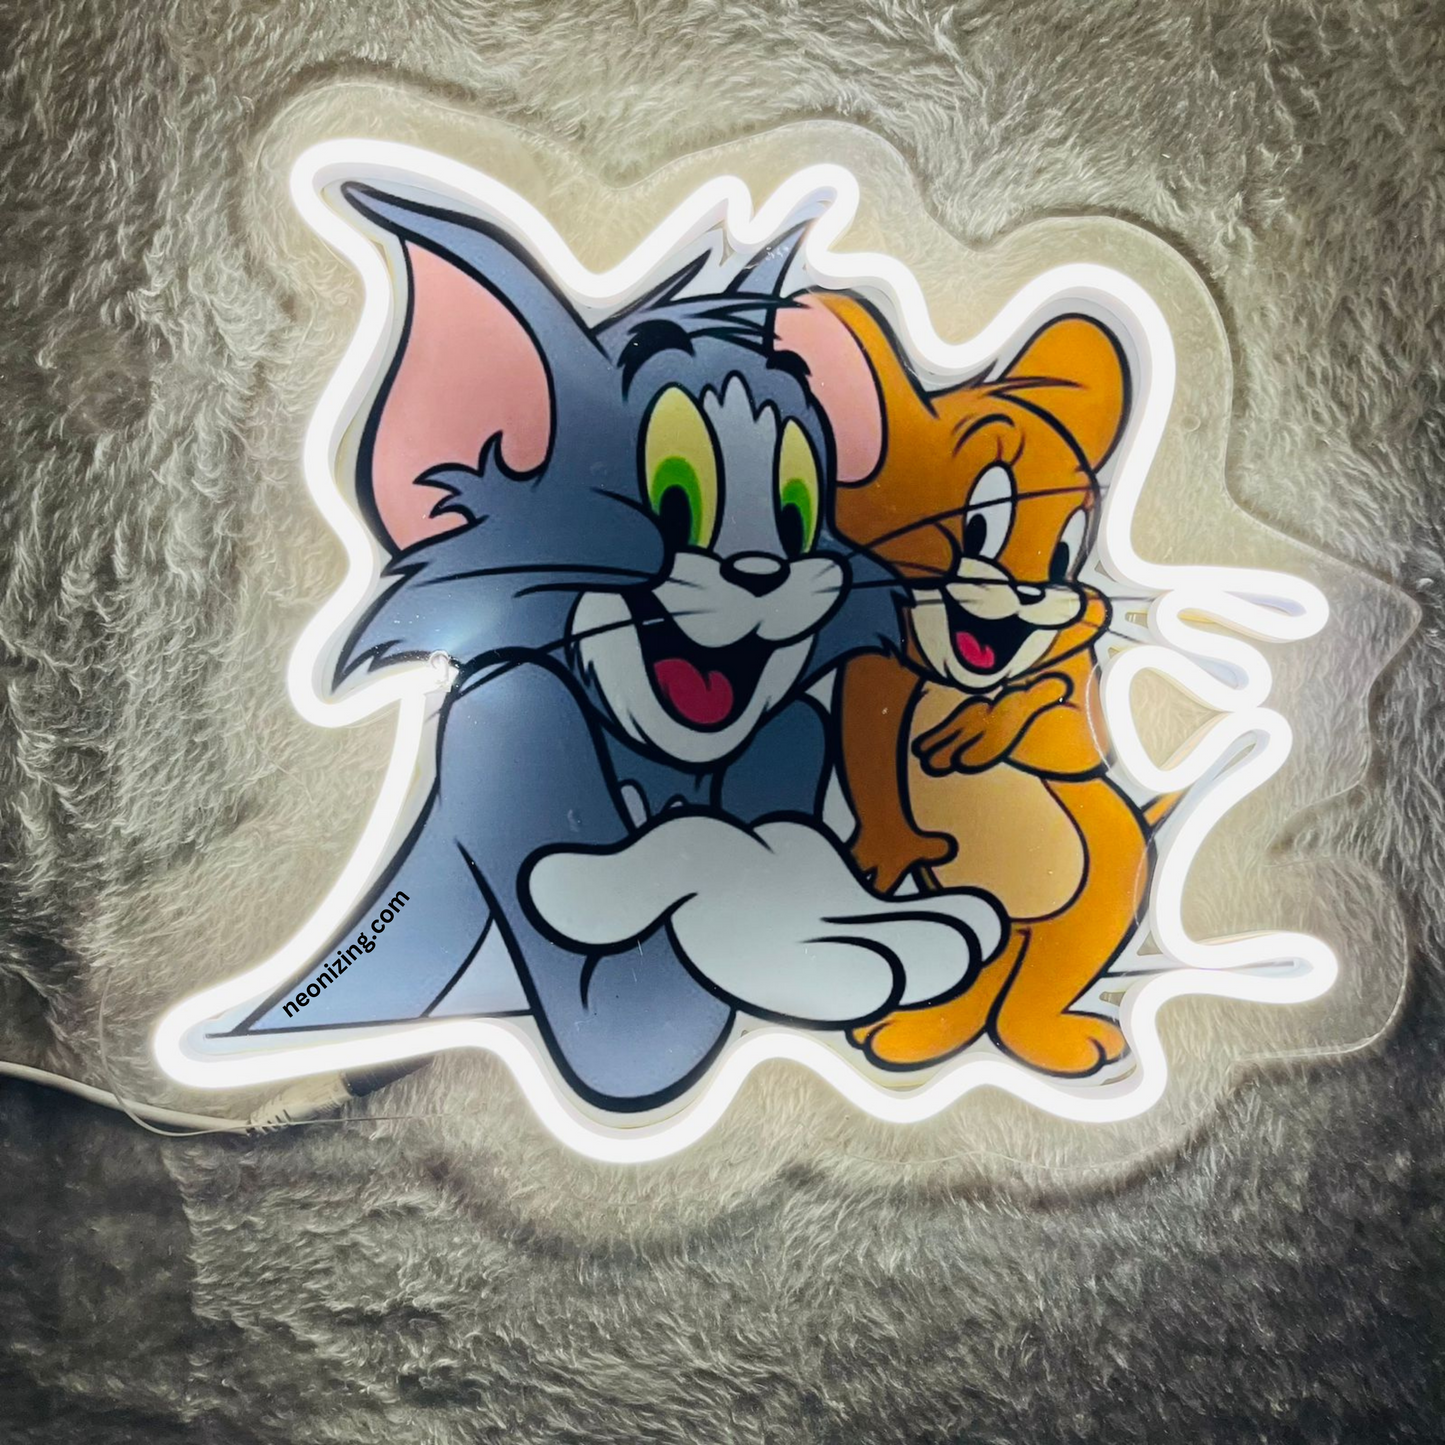 Tom and Jerry Neon Artwork - Relive Childhood Joy with Tom and Jerry Magic